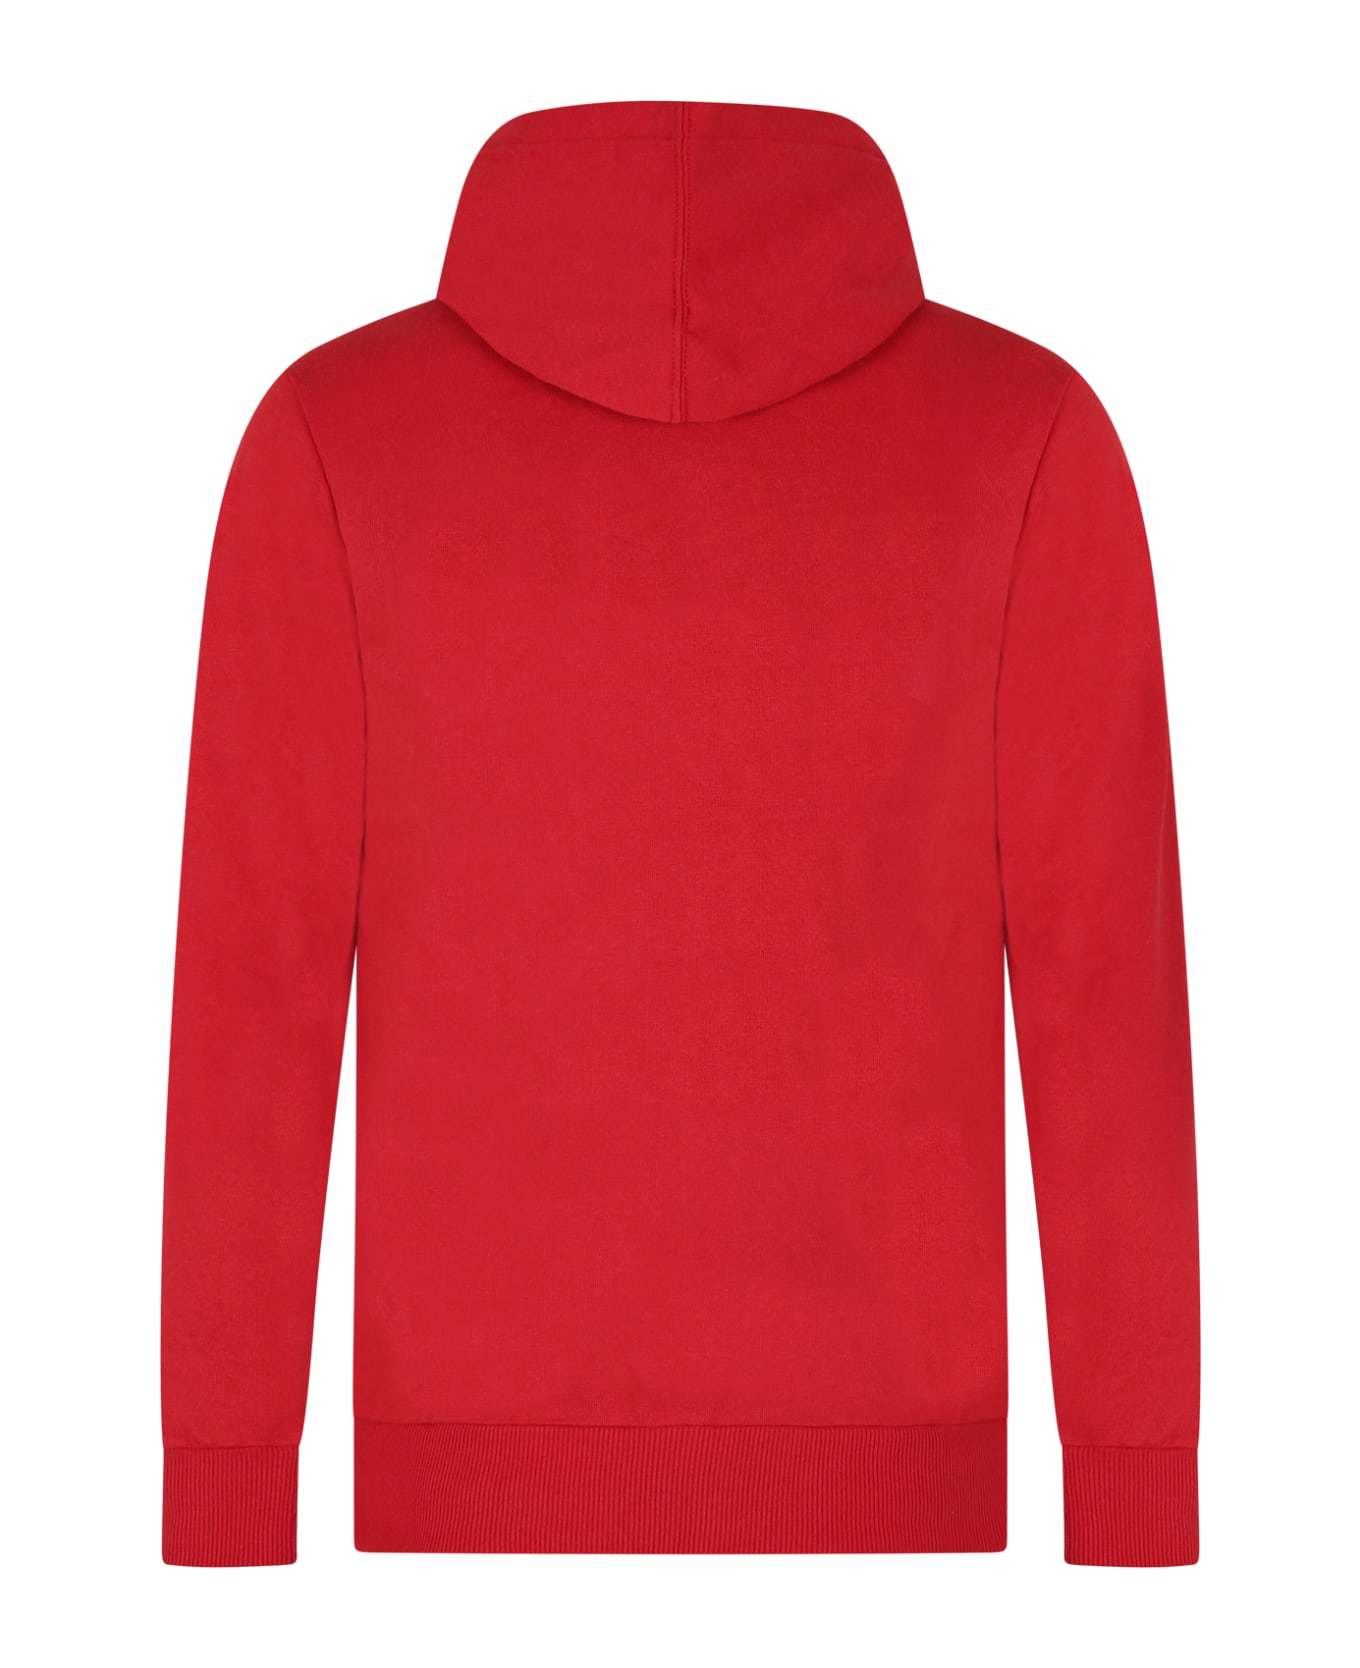 Levi's Red Sweatshirt For Kids With Logo - Red